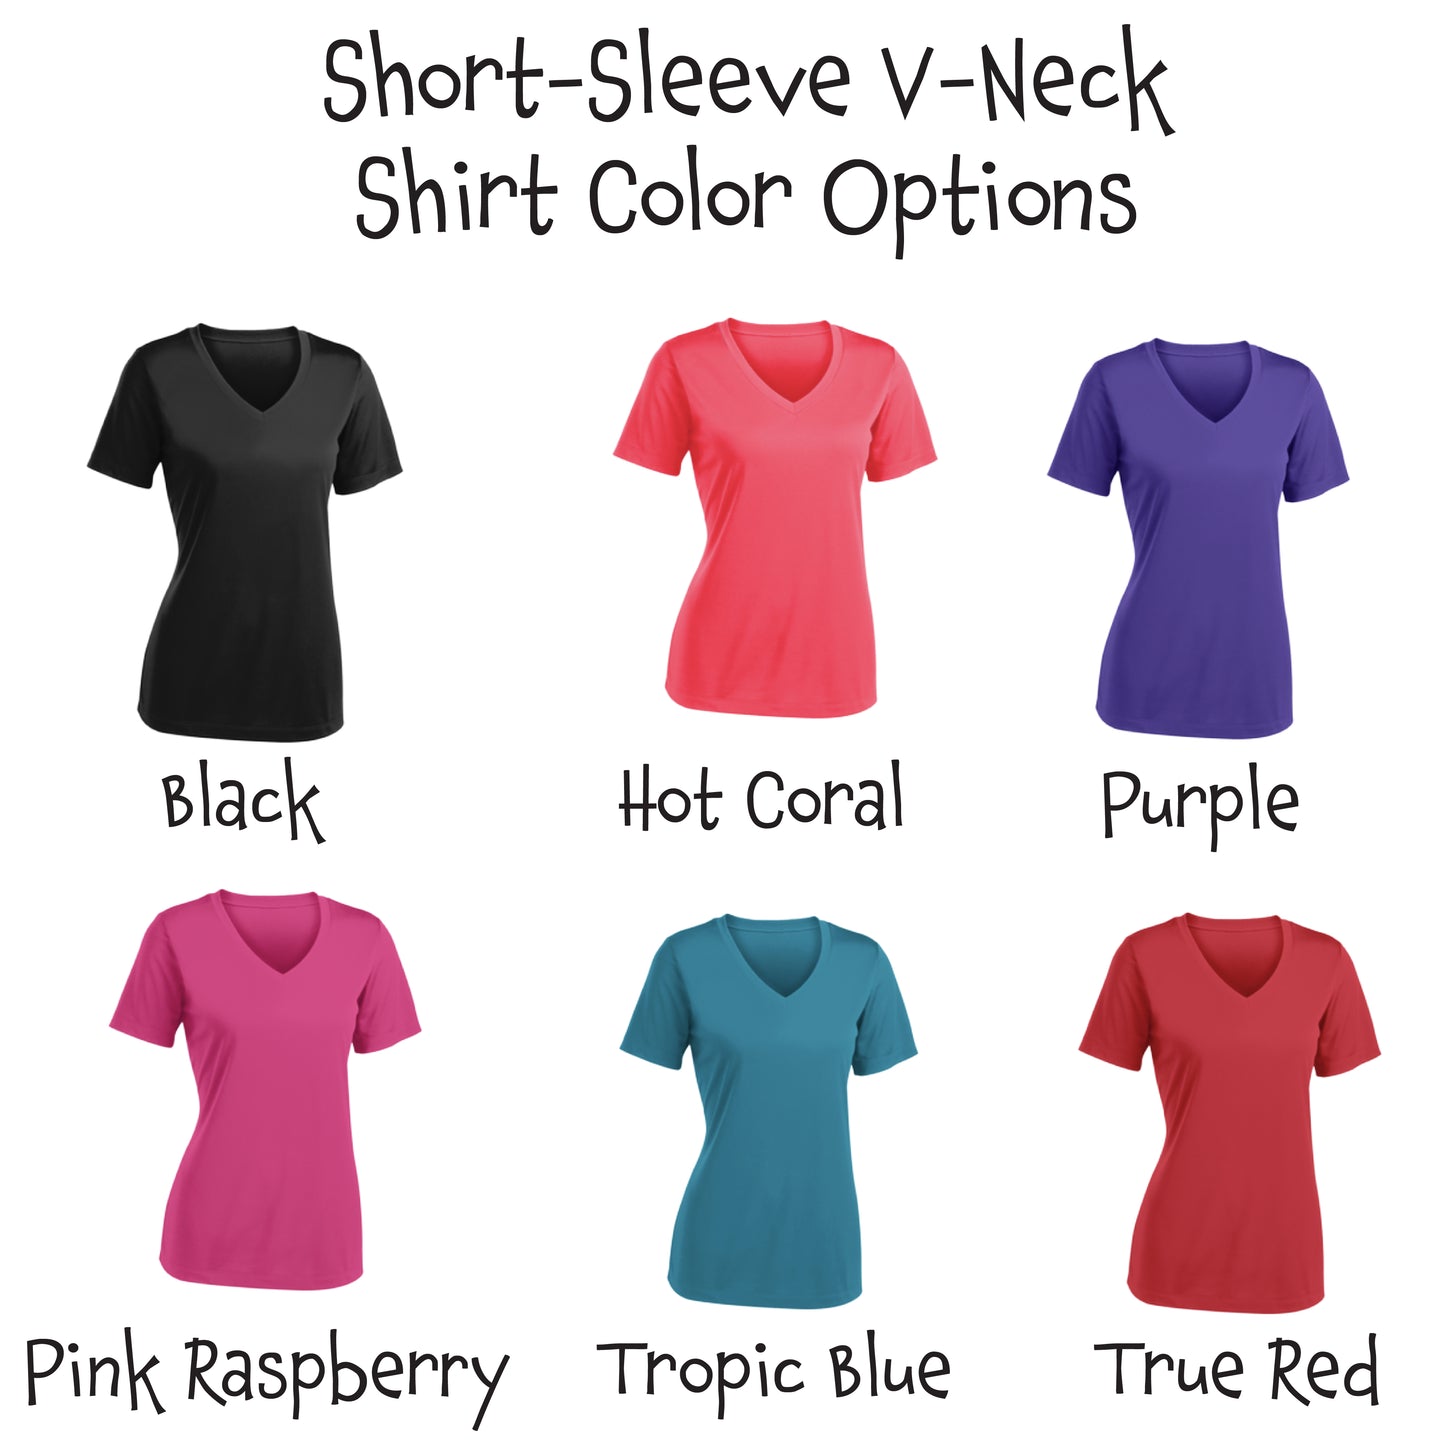 002 With Pickleballs (Colors Rainbow Red Cyan) Customizable | Women's Short Sleeve V-Neck Pickleball Shirts | 100% Polyester